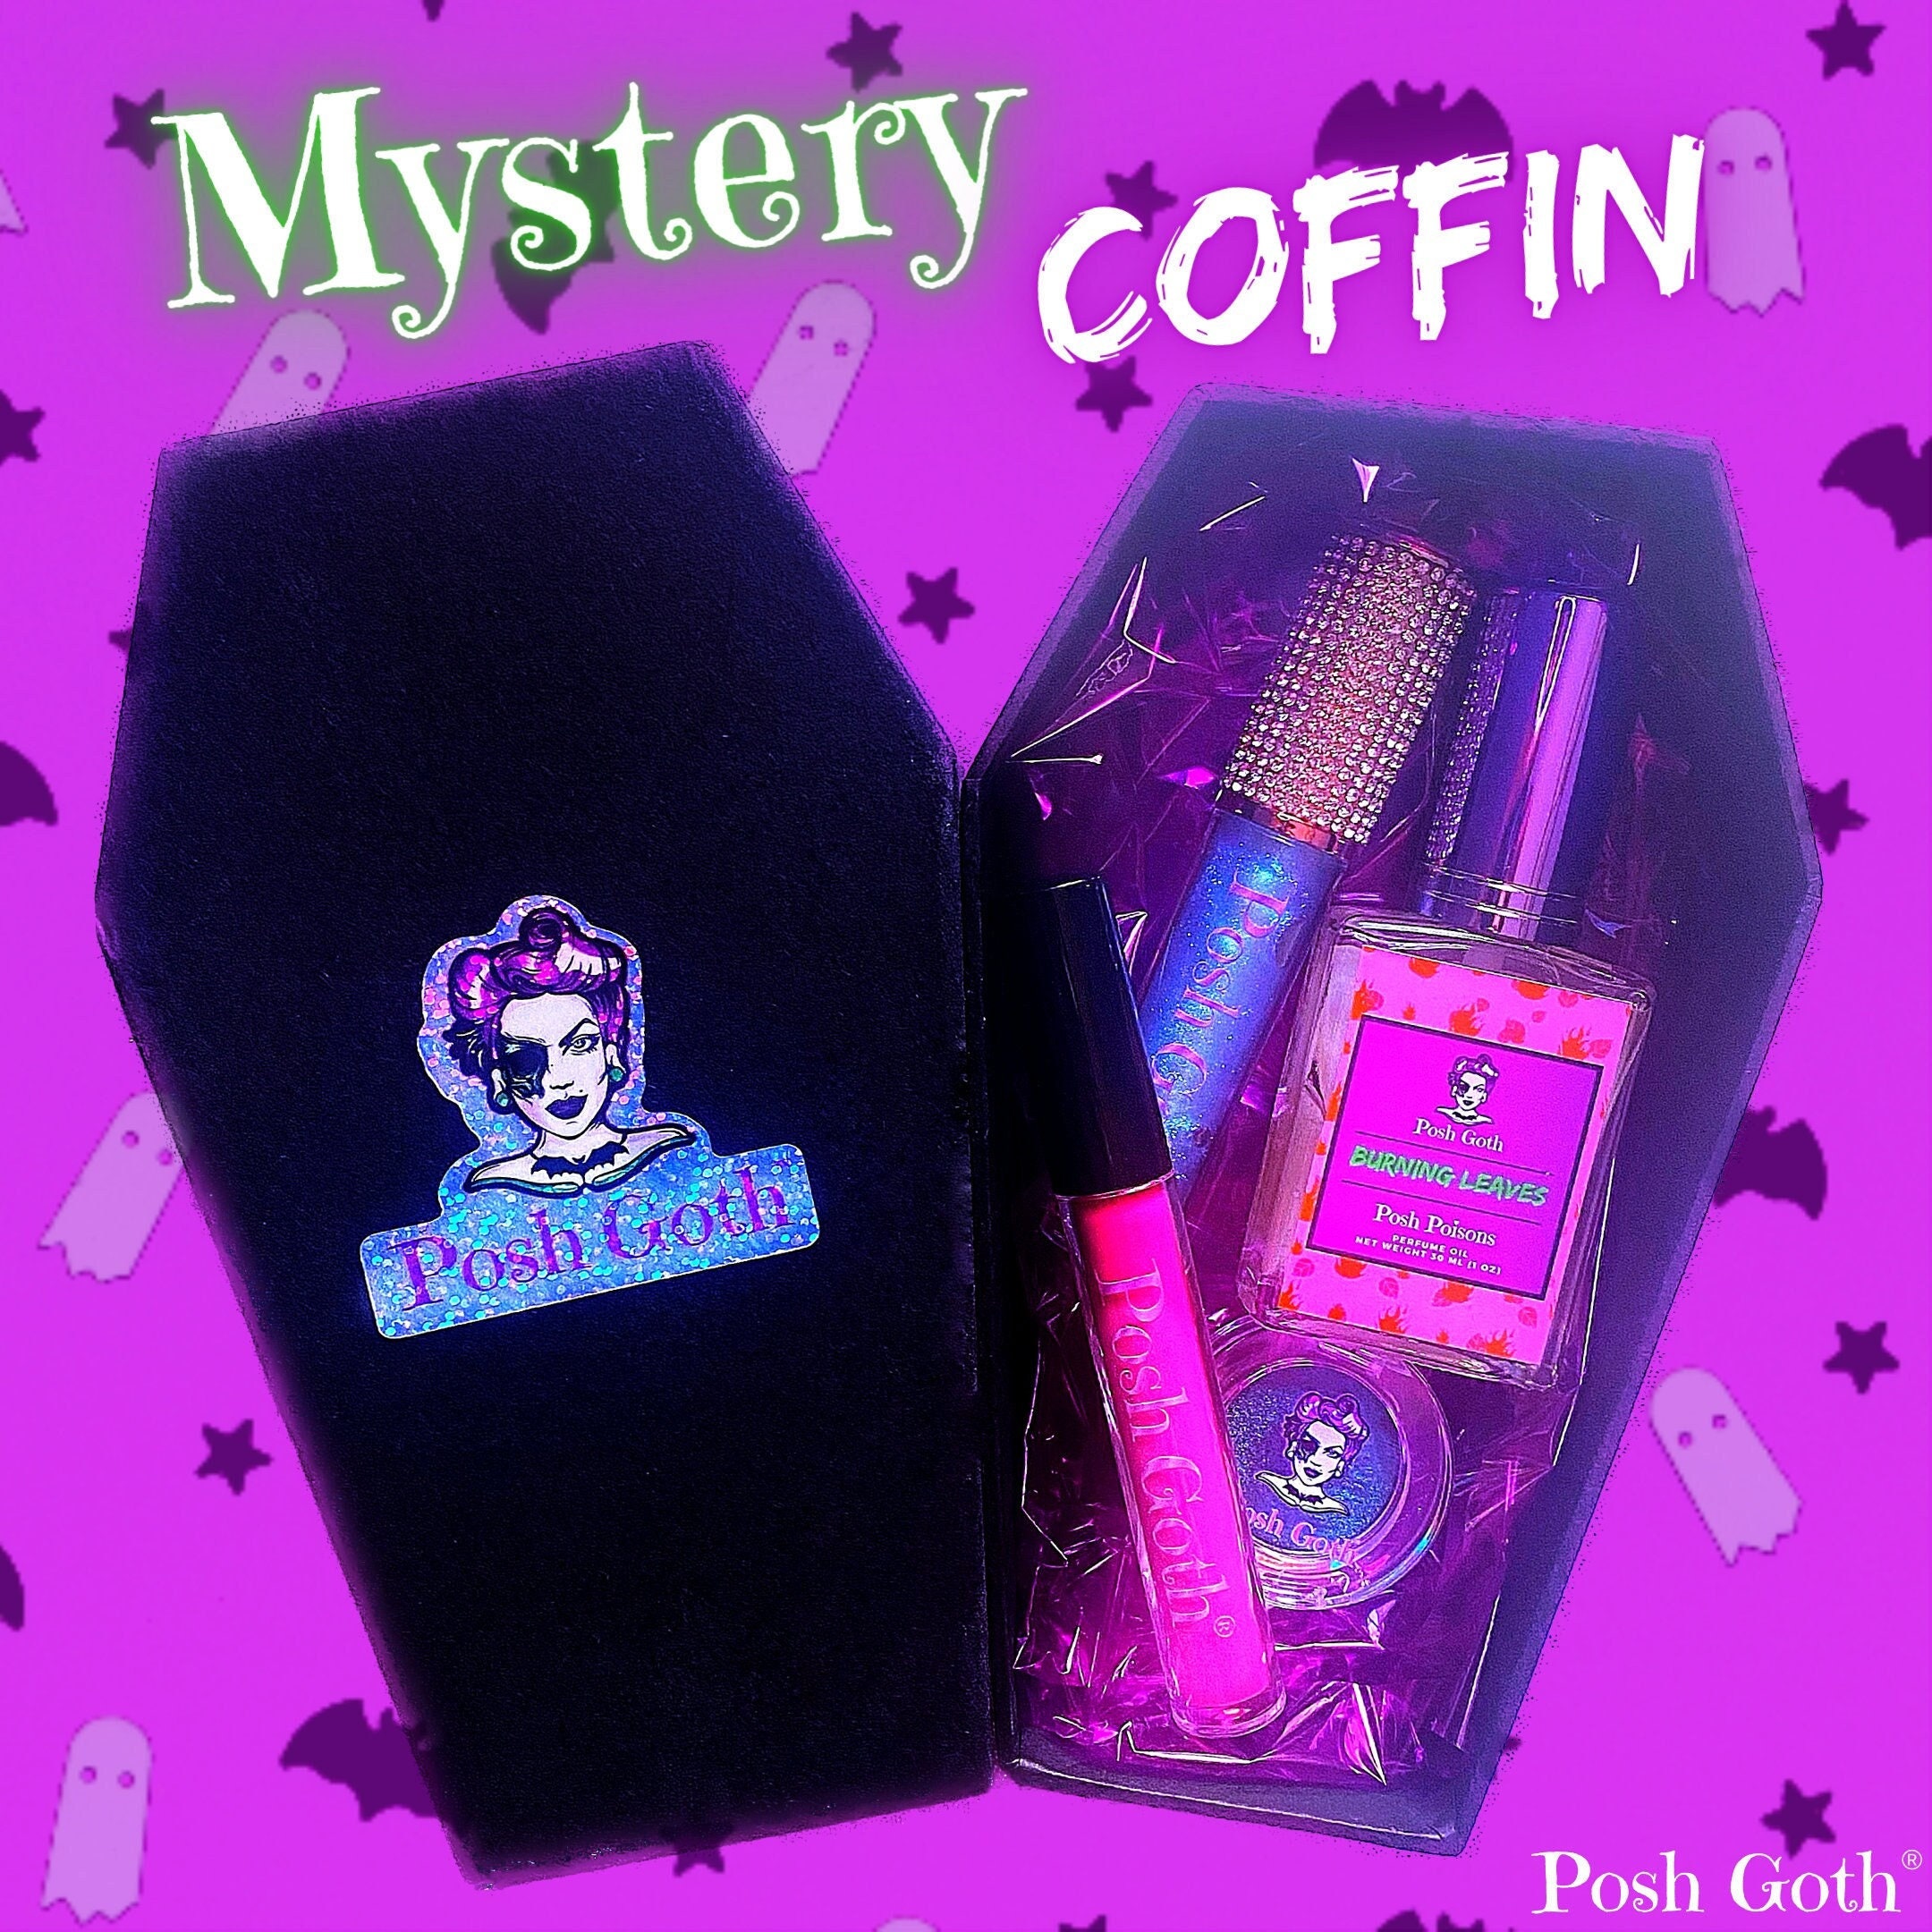 Mystery Coffins Goth Makeup and Perfume Surprise Beauty Box 